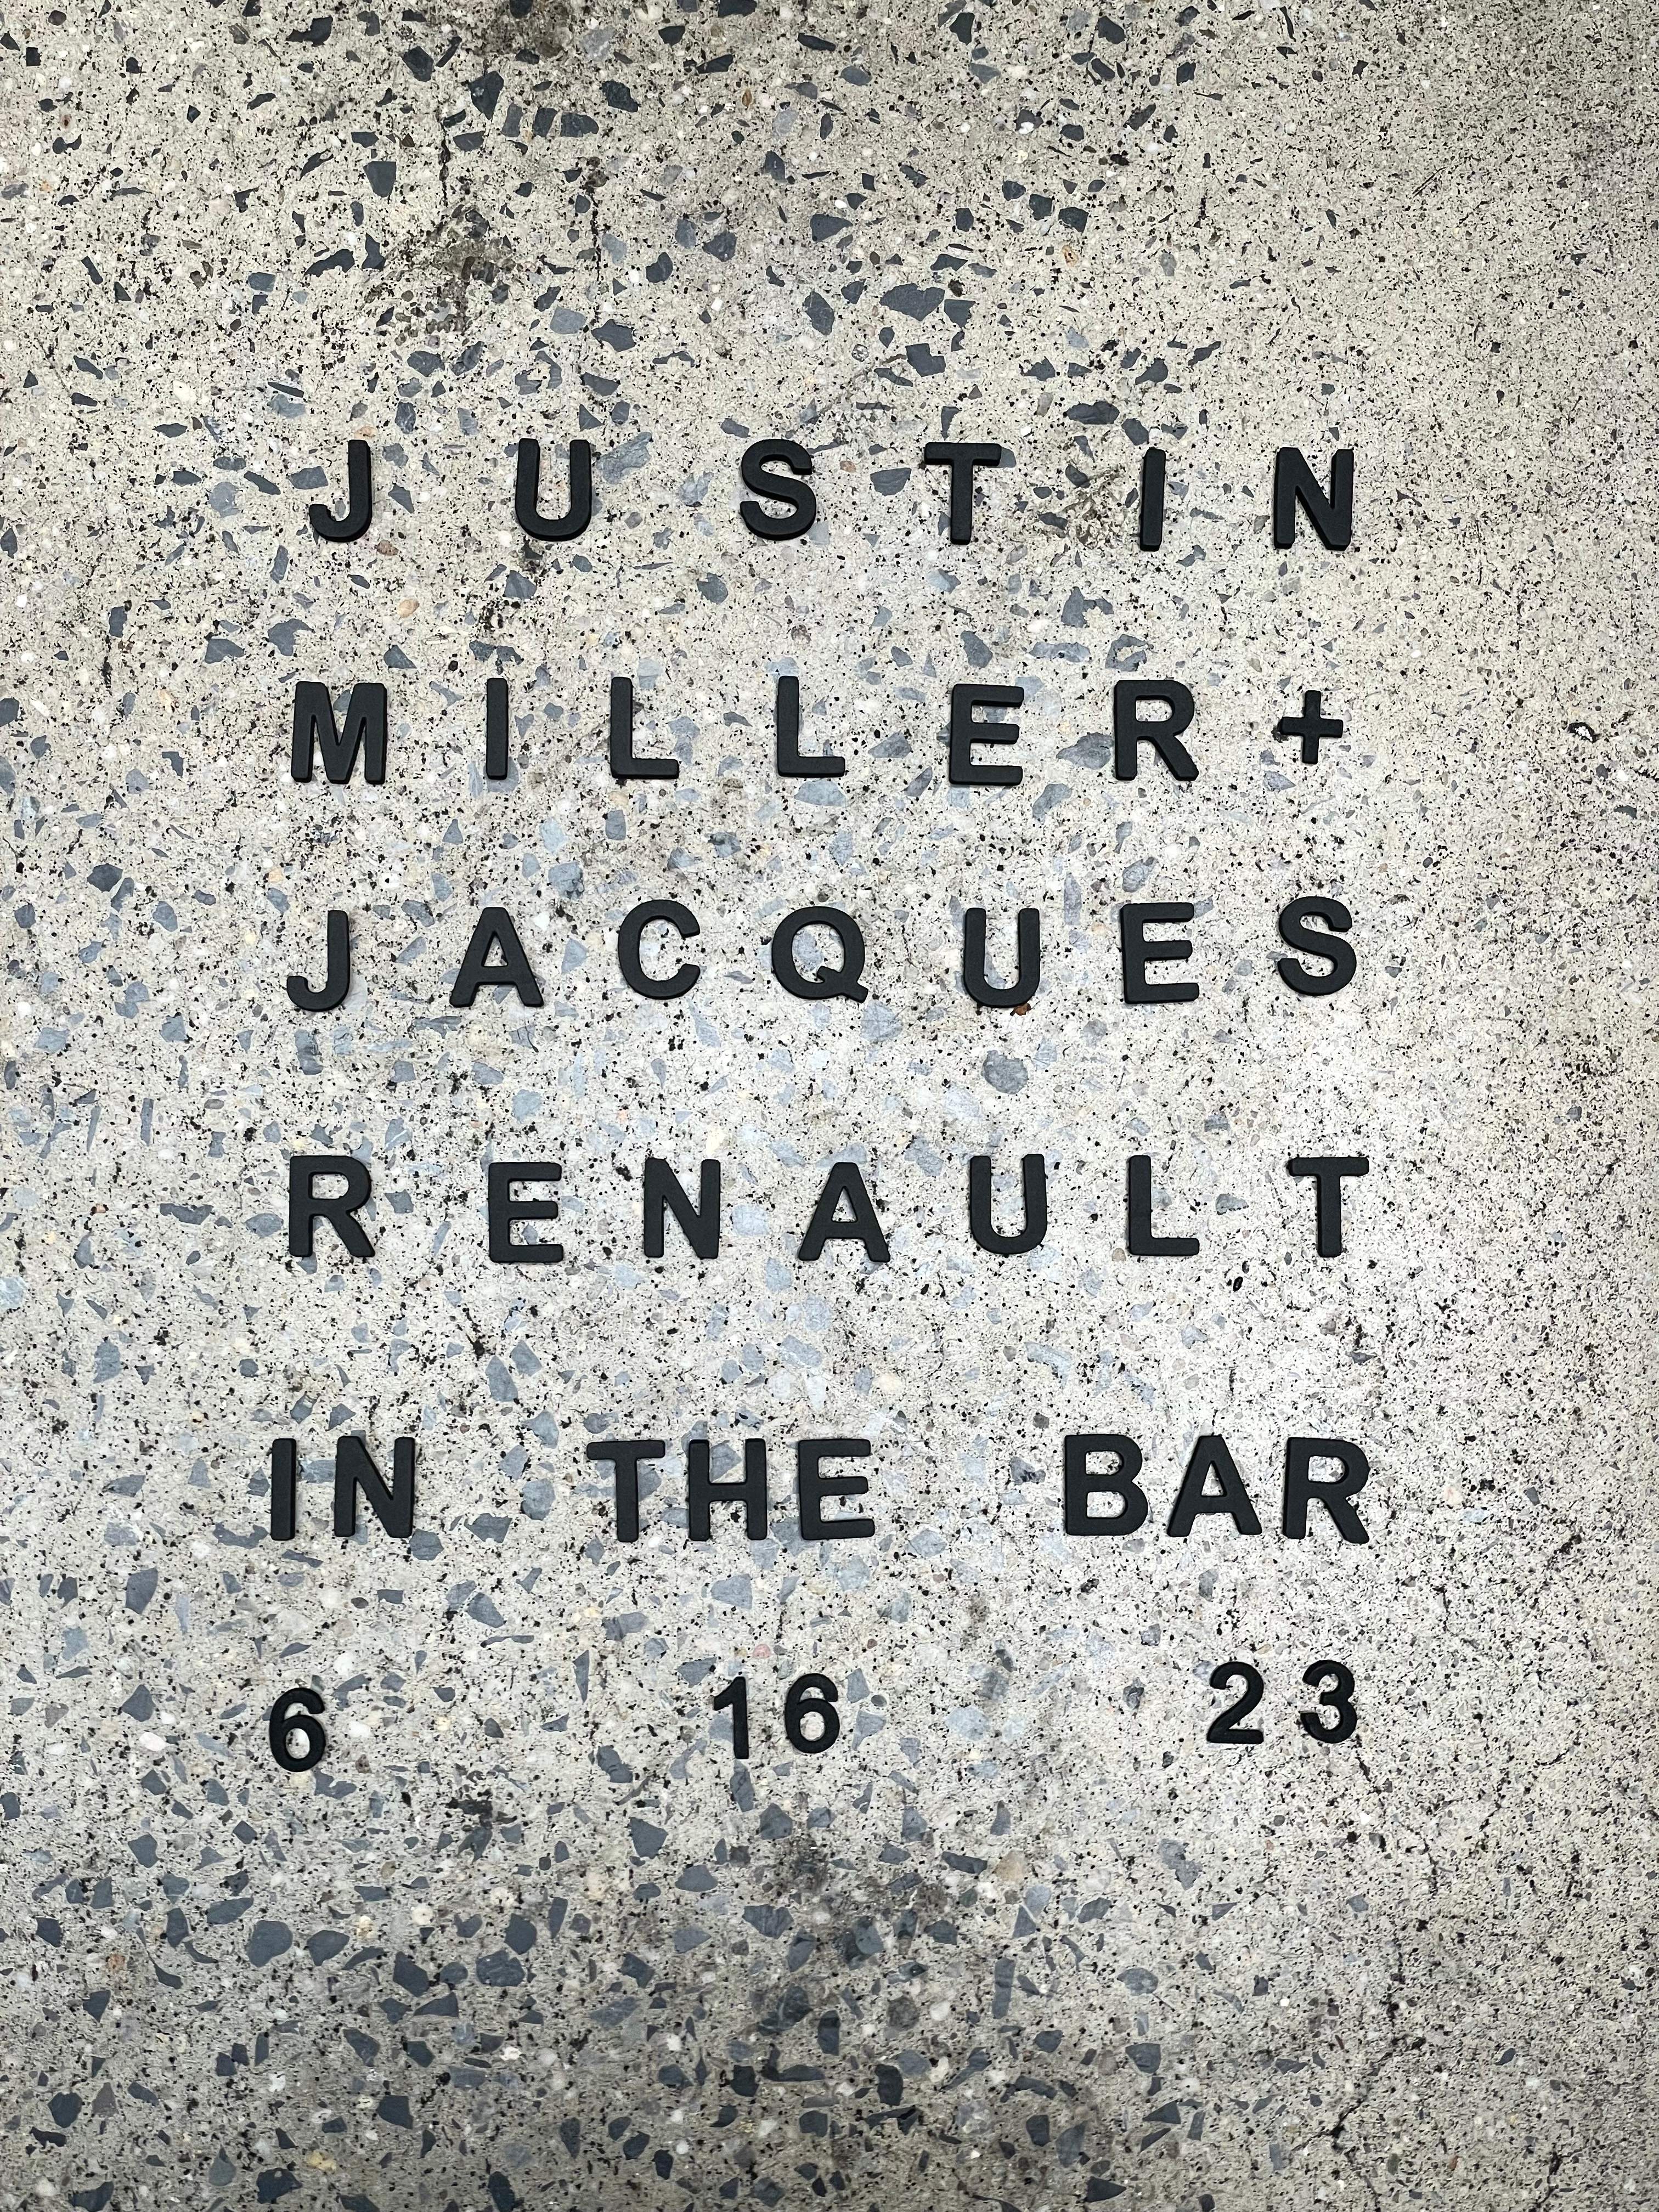 Justin Miller + Jacques Renault: In The Bar - フライヤー表